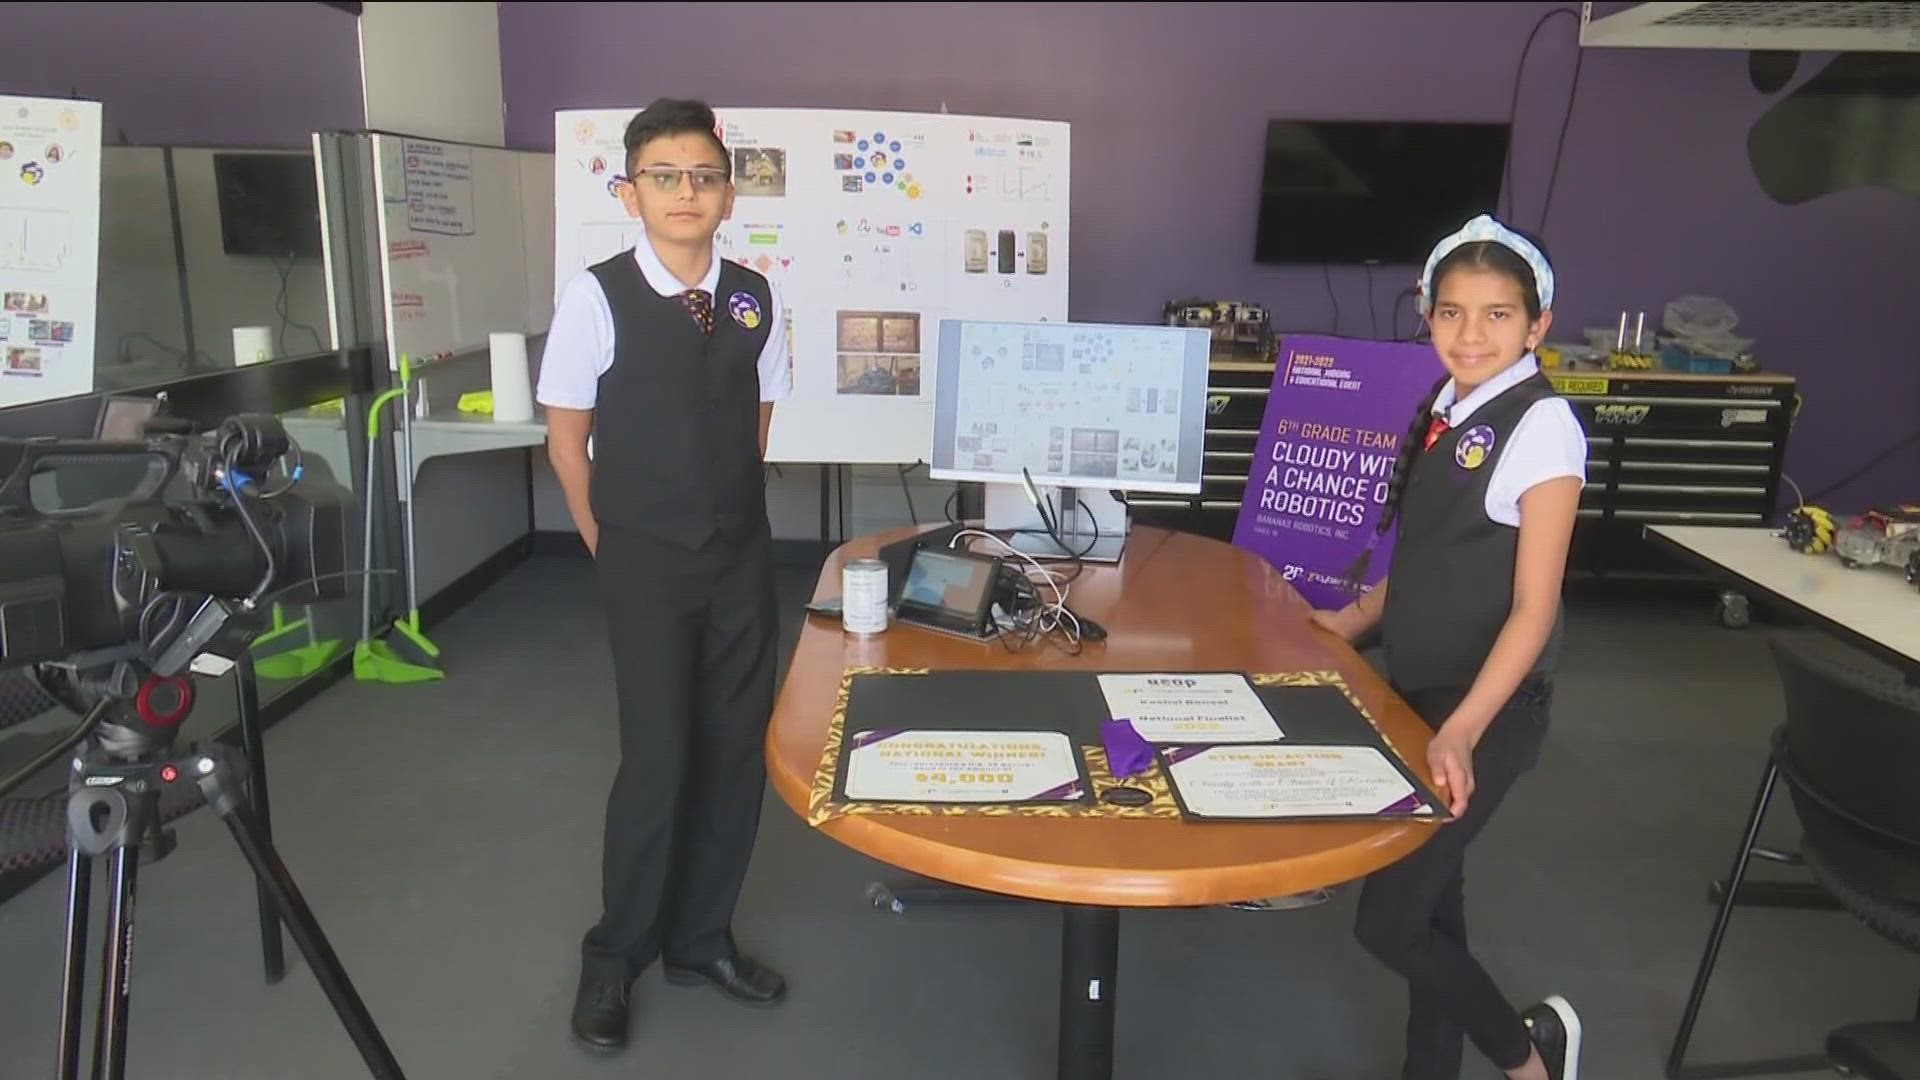 Sixth graders Kashvi Bansal and Rishi Gajera were selected as one of 20 national finalists for eCYBERMISSION in Washington D.C. this last week.